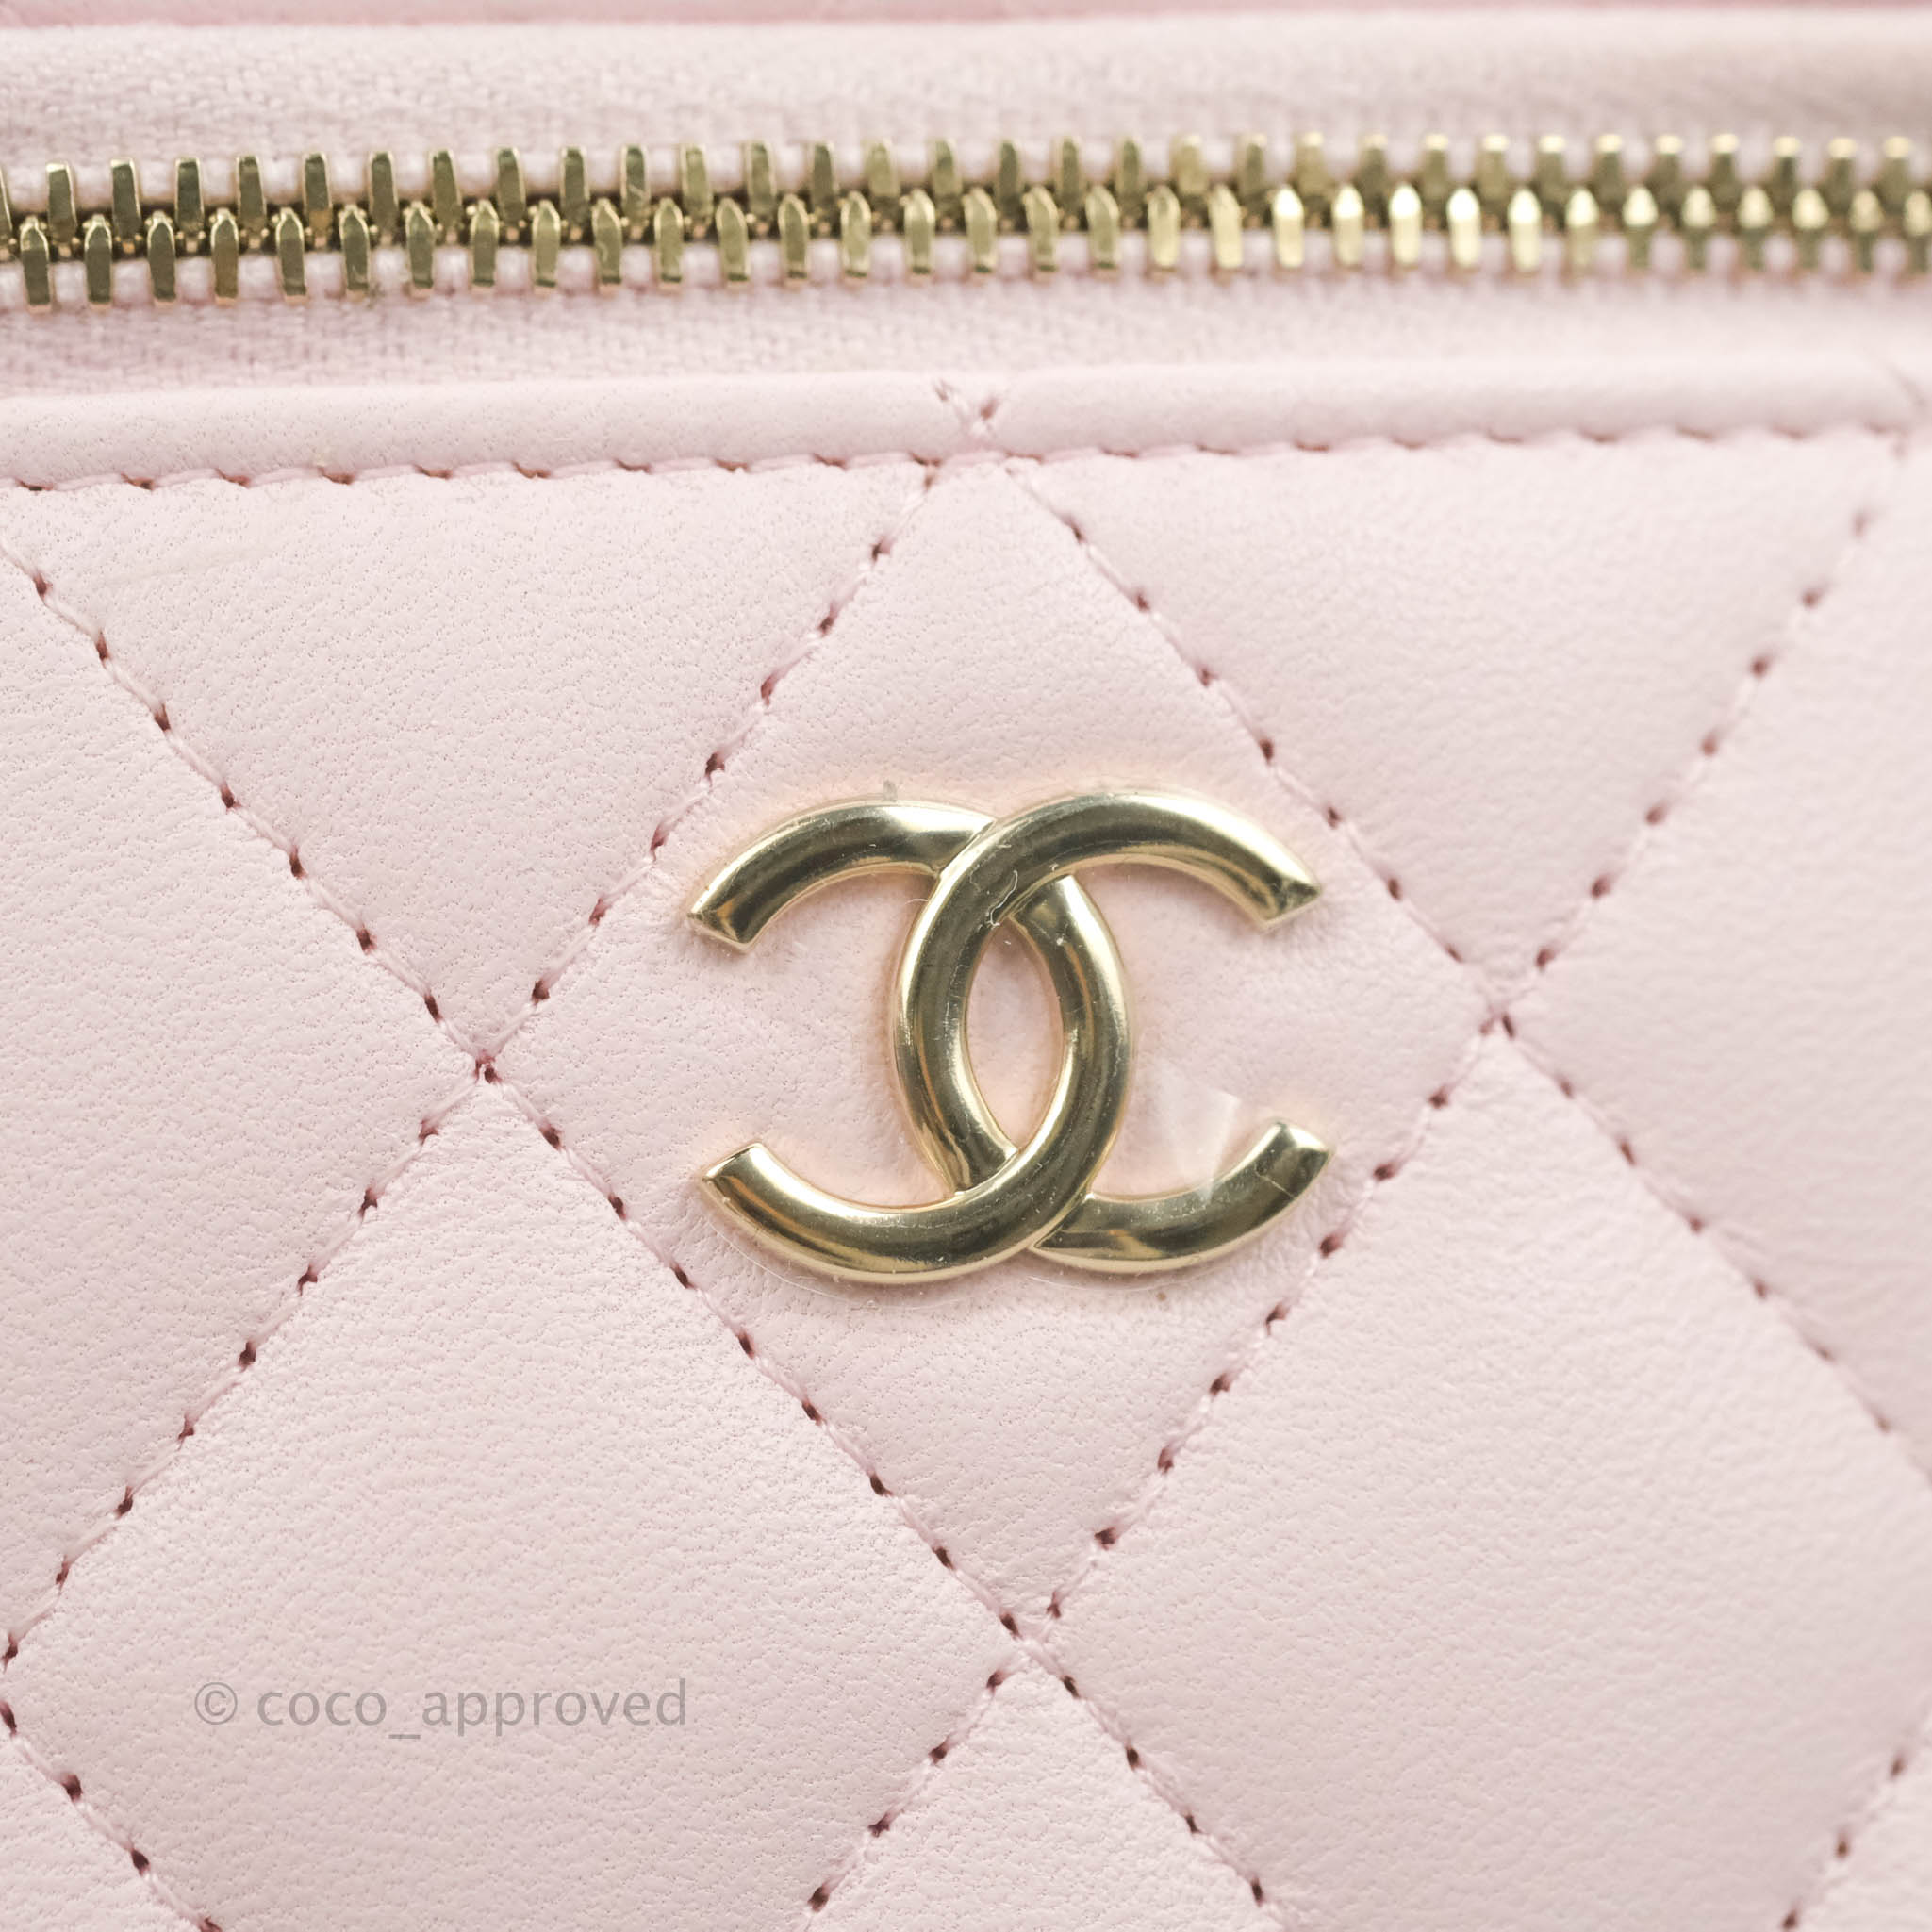 Chanel Mini Top Handle Vanity With Chain Light Pink Lambskin Gold Hard –  Coco Approved Studio